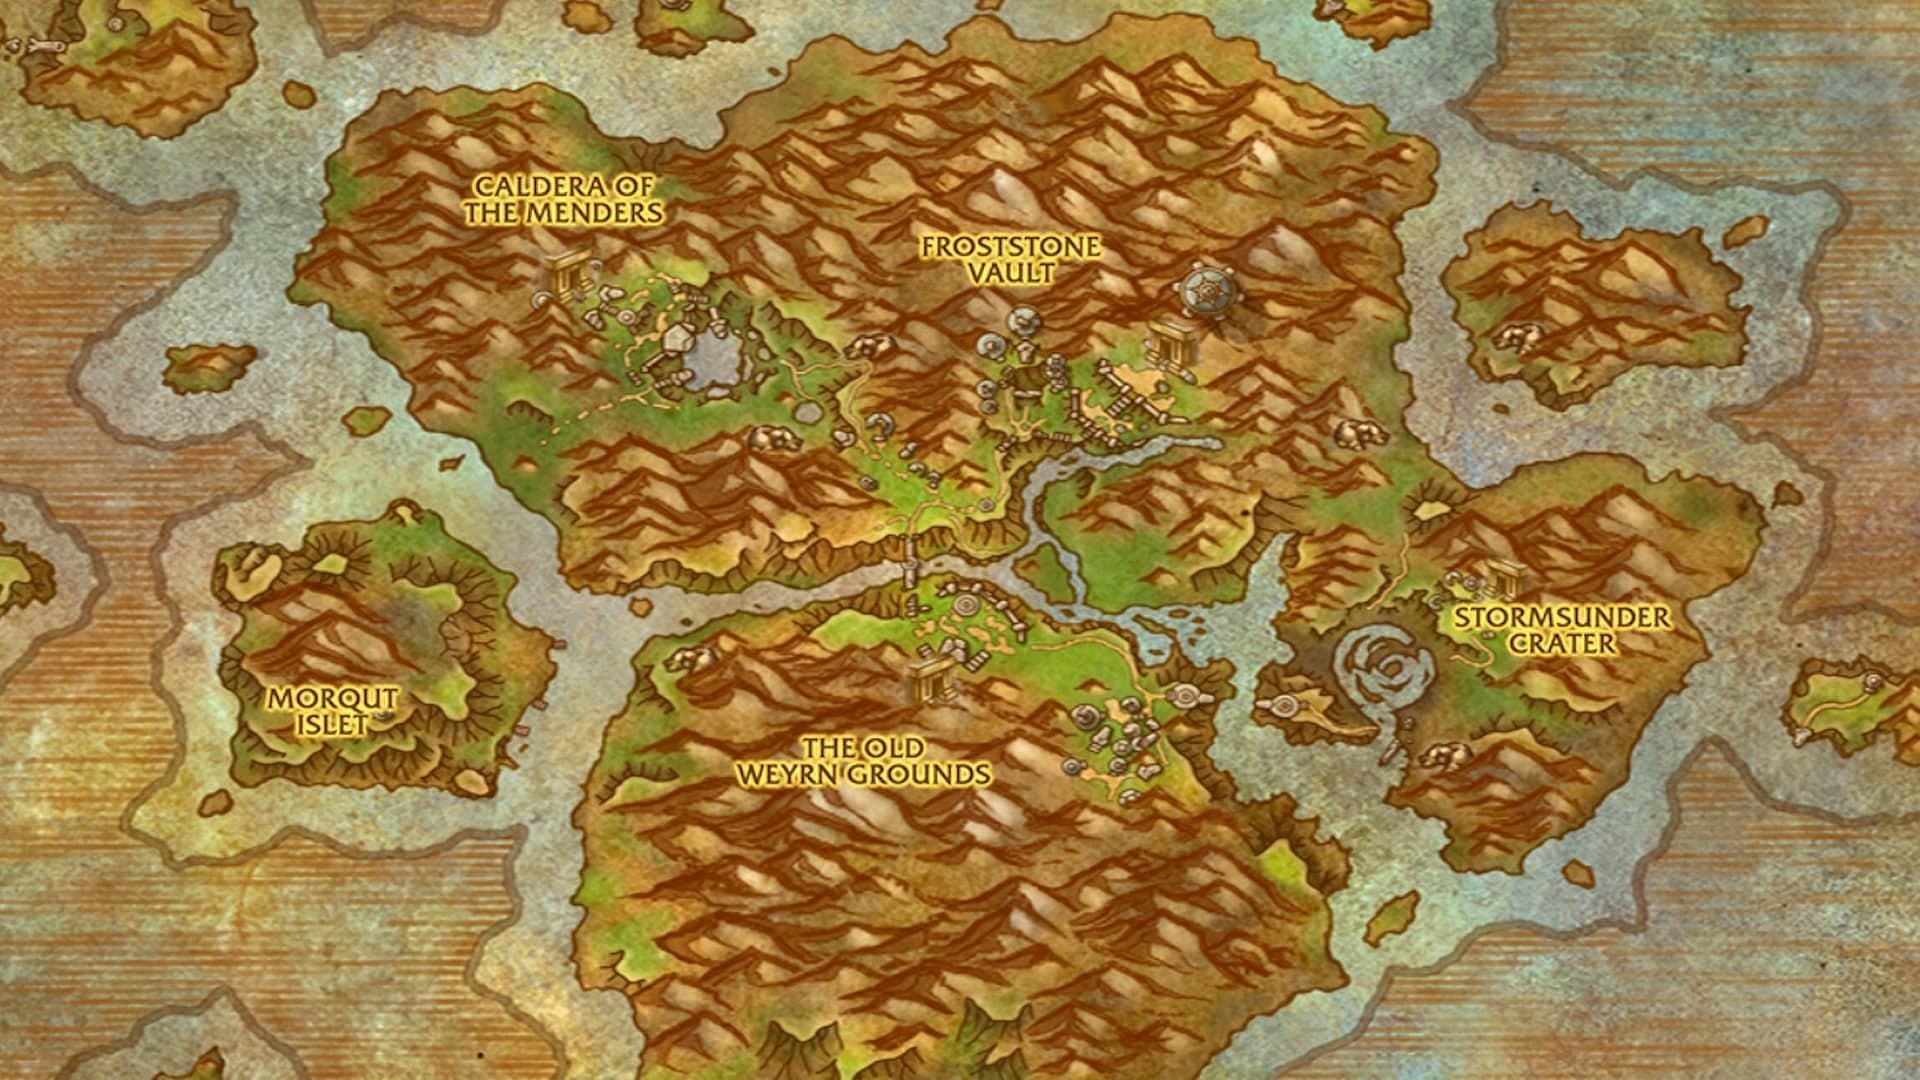 Morqut Village can be found on the eastern side of the Morqut Isles, diagonally across the Old Weyrn Grounds (Image via Blizzard)